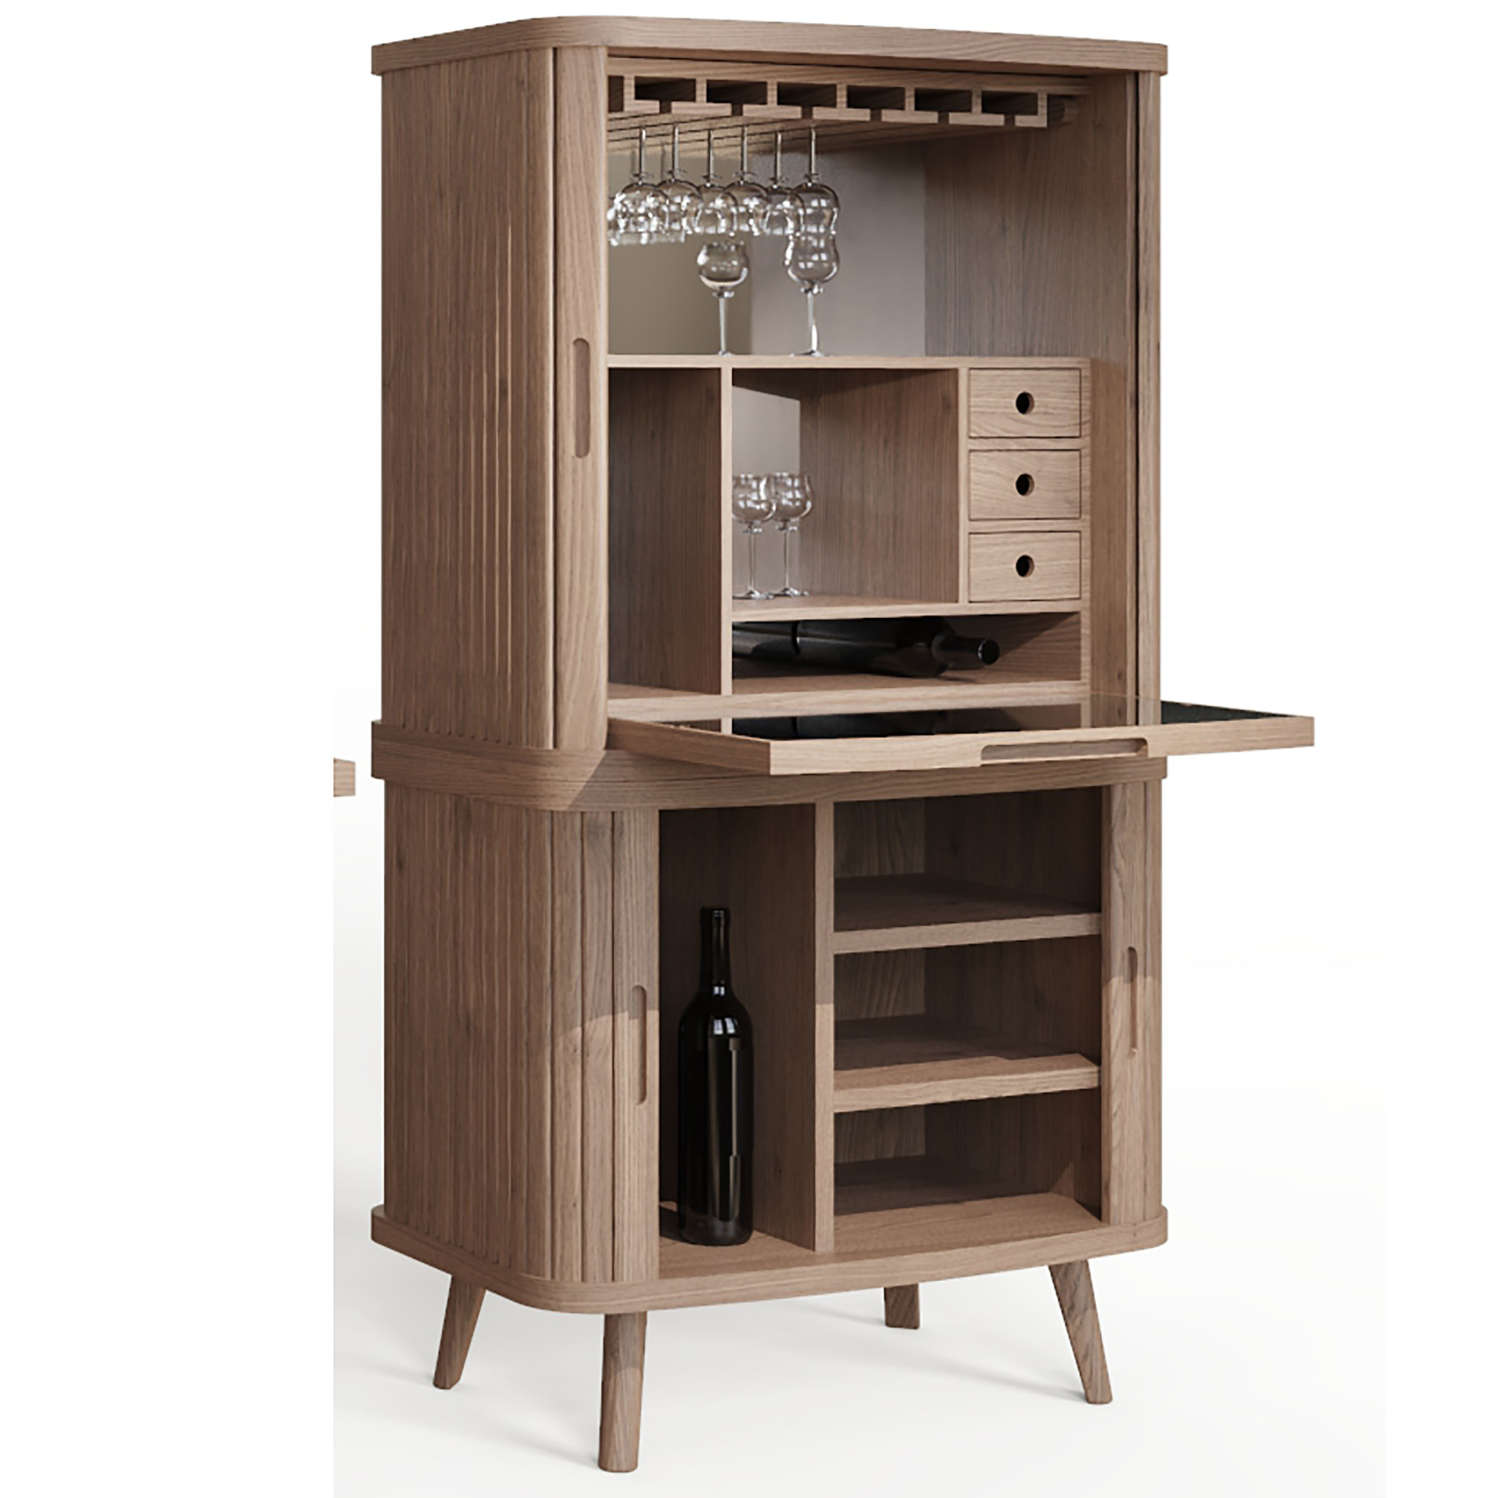 Tambour desk and drinks cabinet